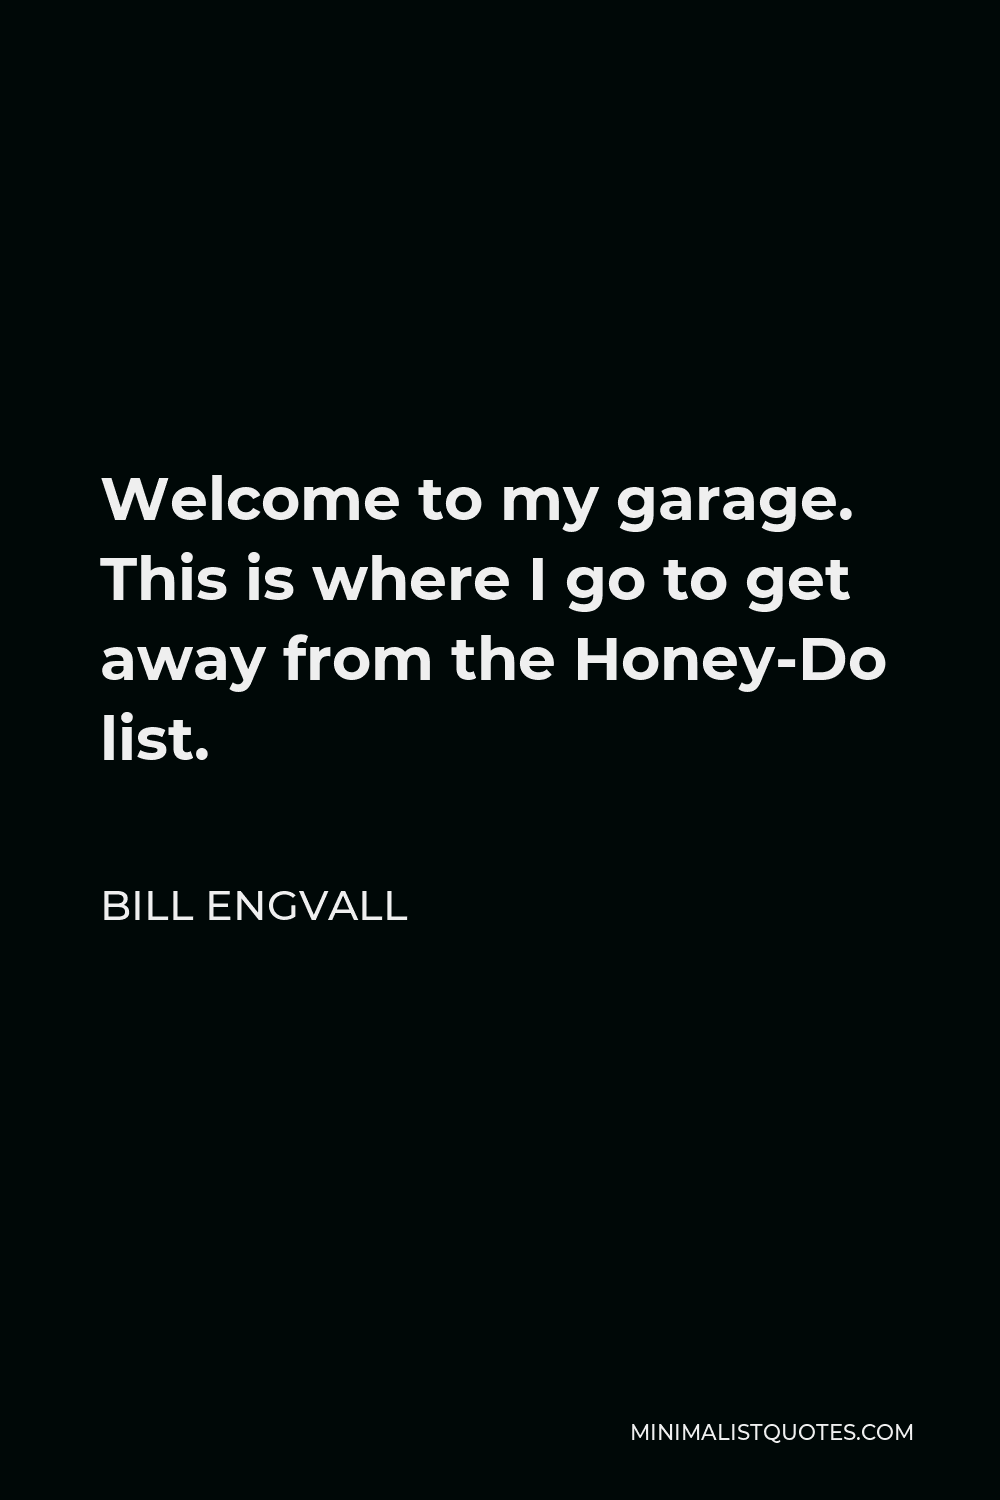 Bill Engvall Quote - Welcome to my garage. This is where I go to get away from the Honey-Do list.